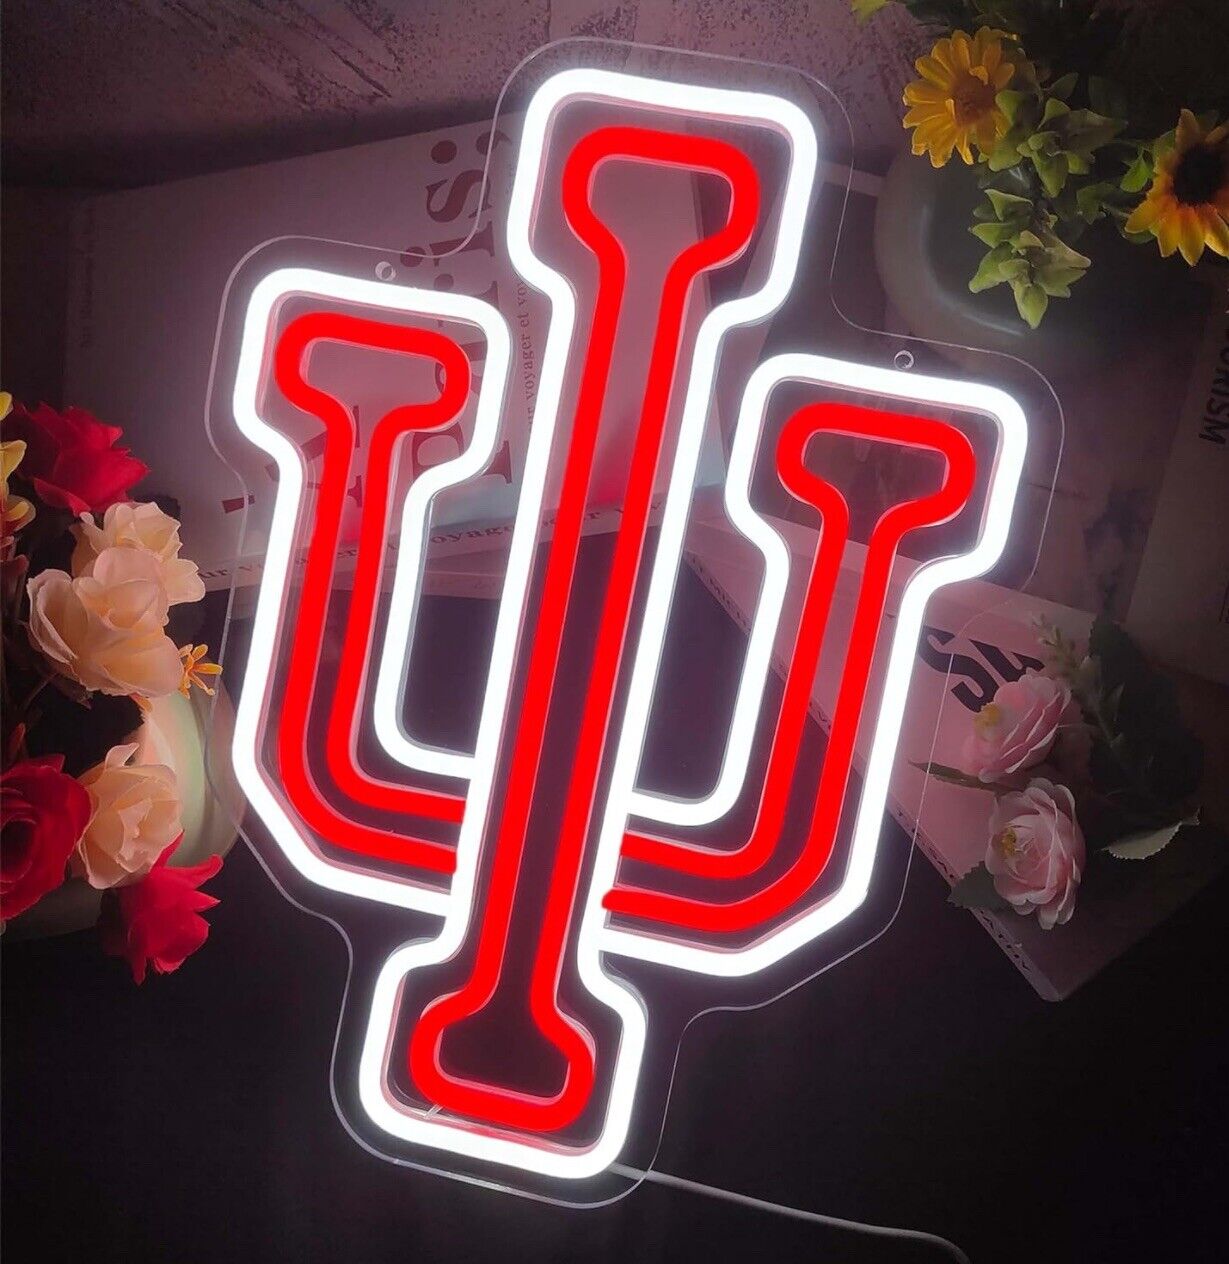 Indiana University Neon Sign College Wall Art Decor Signs LED Lamp Basketball